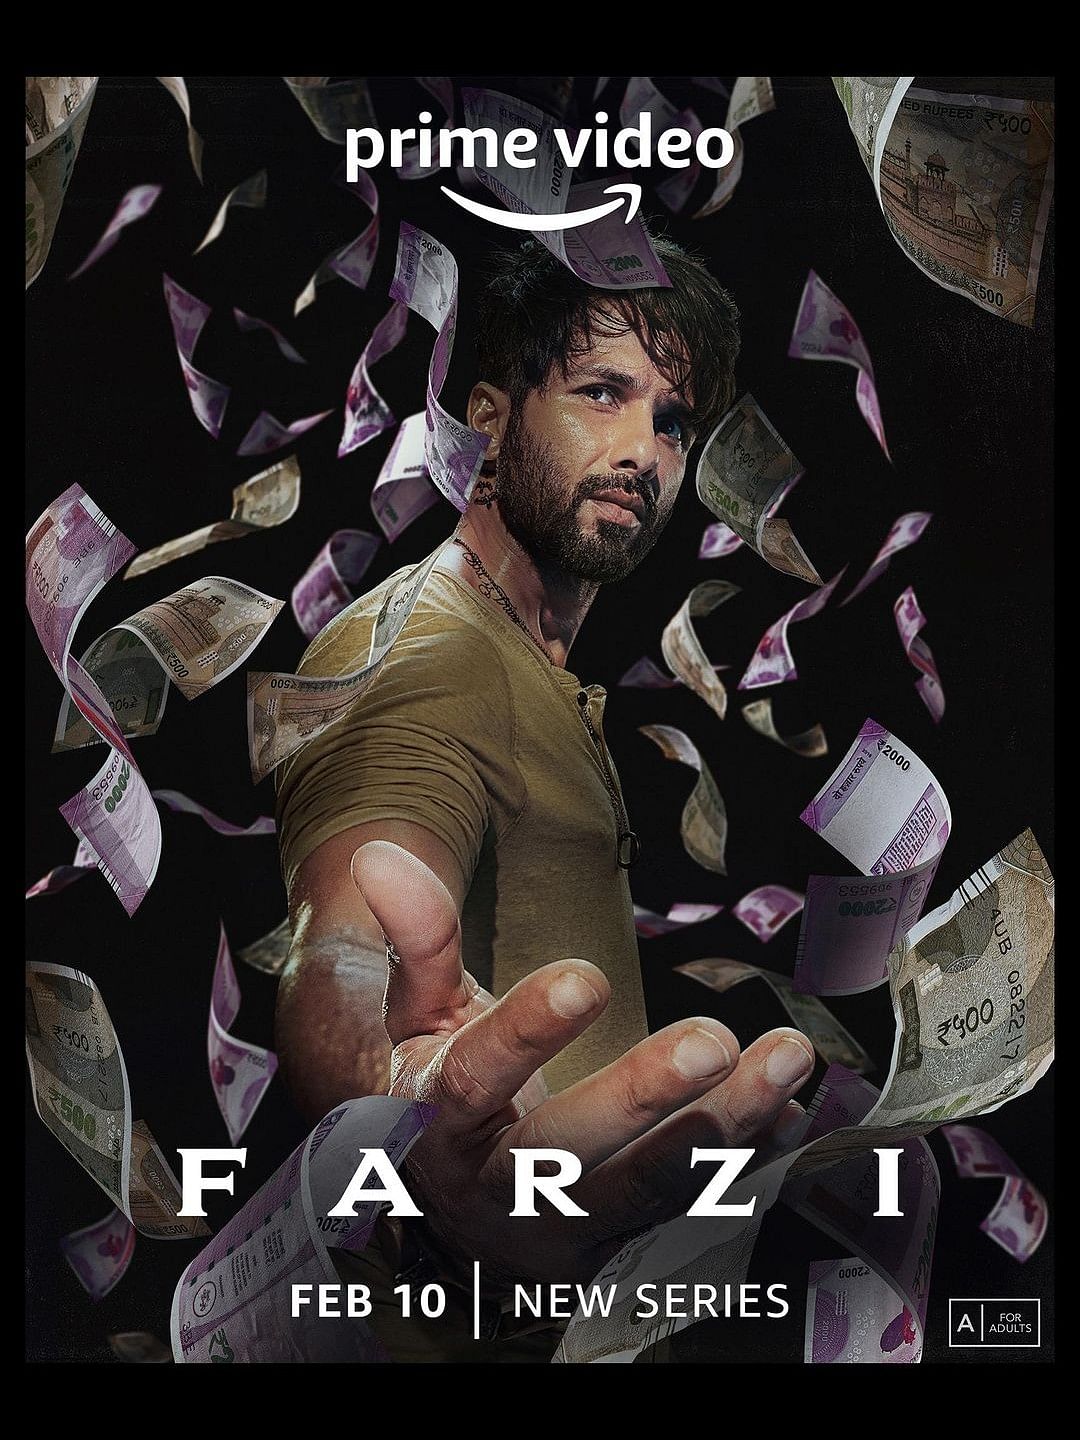 Best Actor in a Web Series: Shahid Kapoor bagged the award for Farzi.